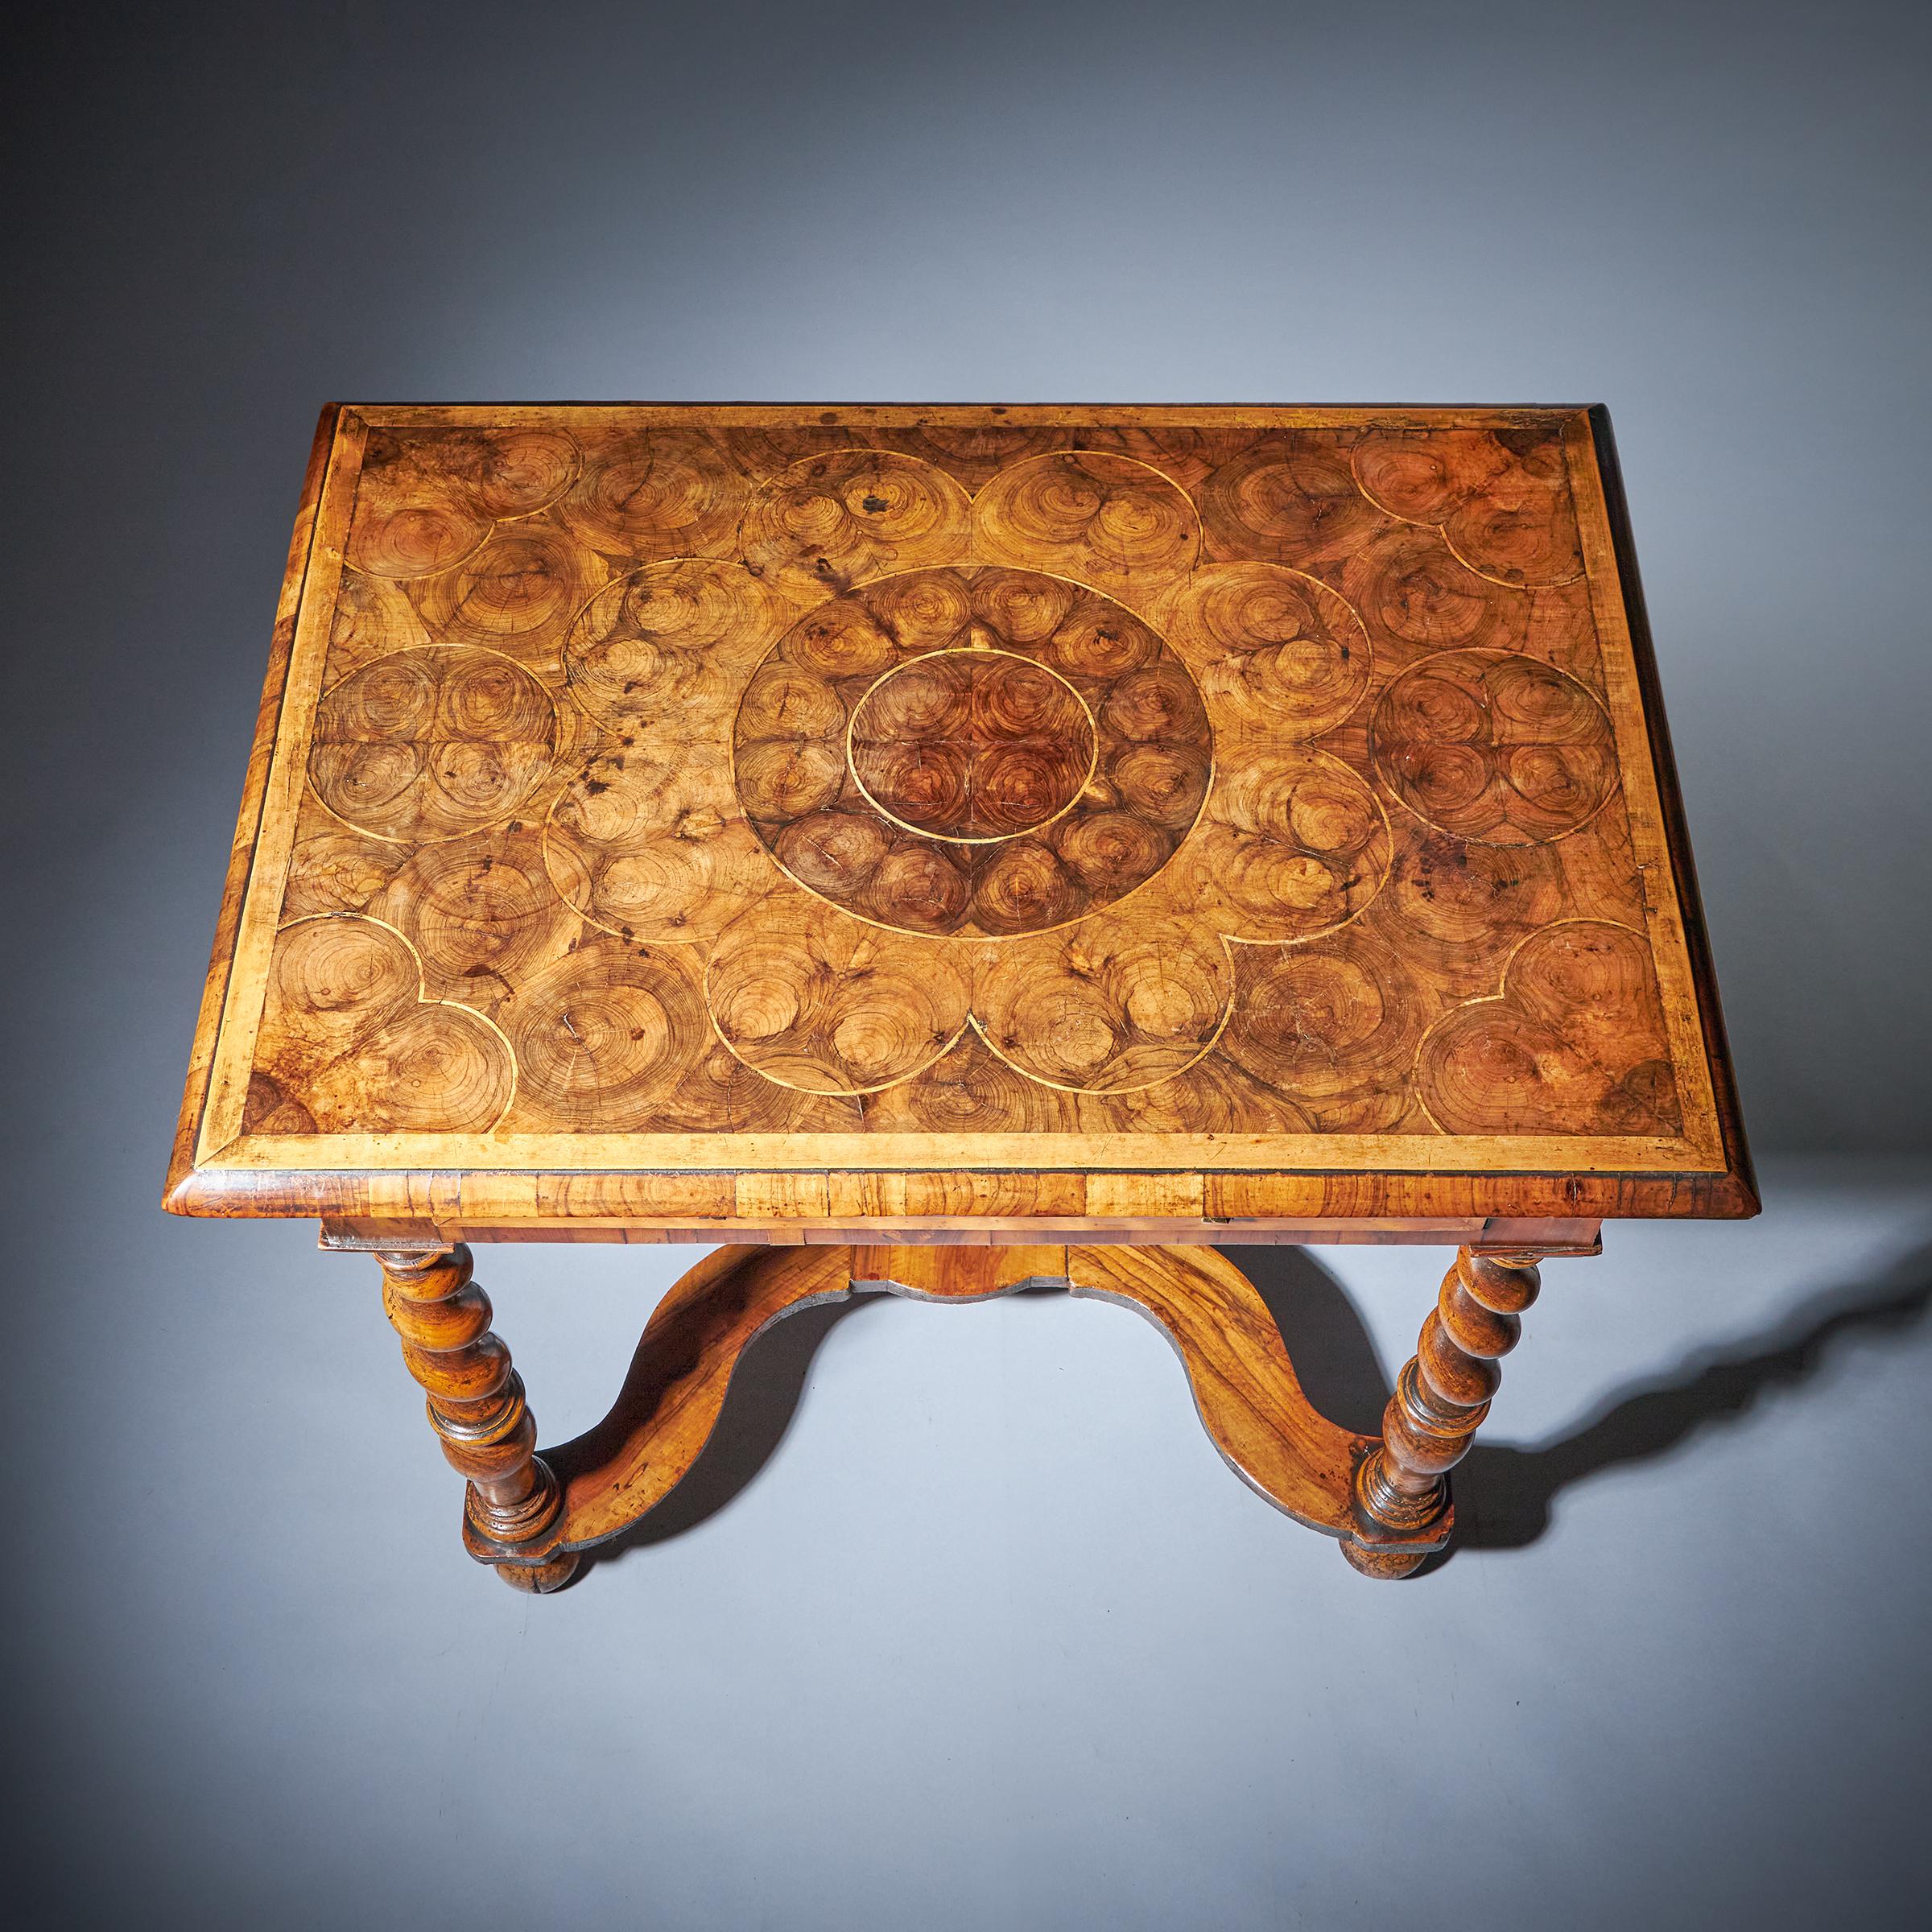 17th Century William and Mary Olive Oyster Table, Circa 1680-1700 2